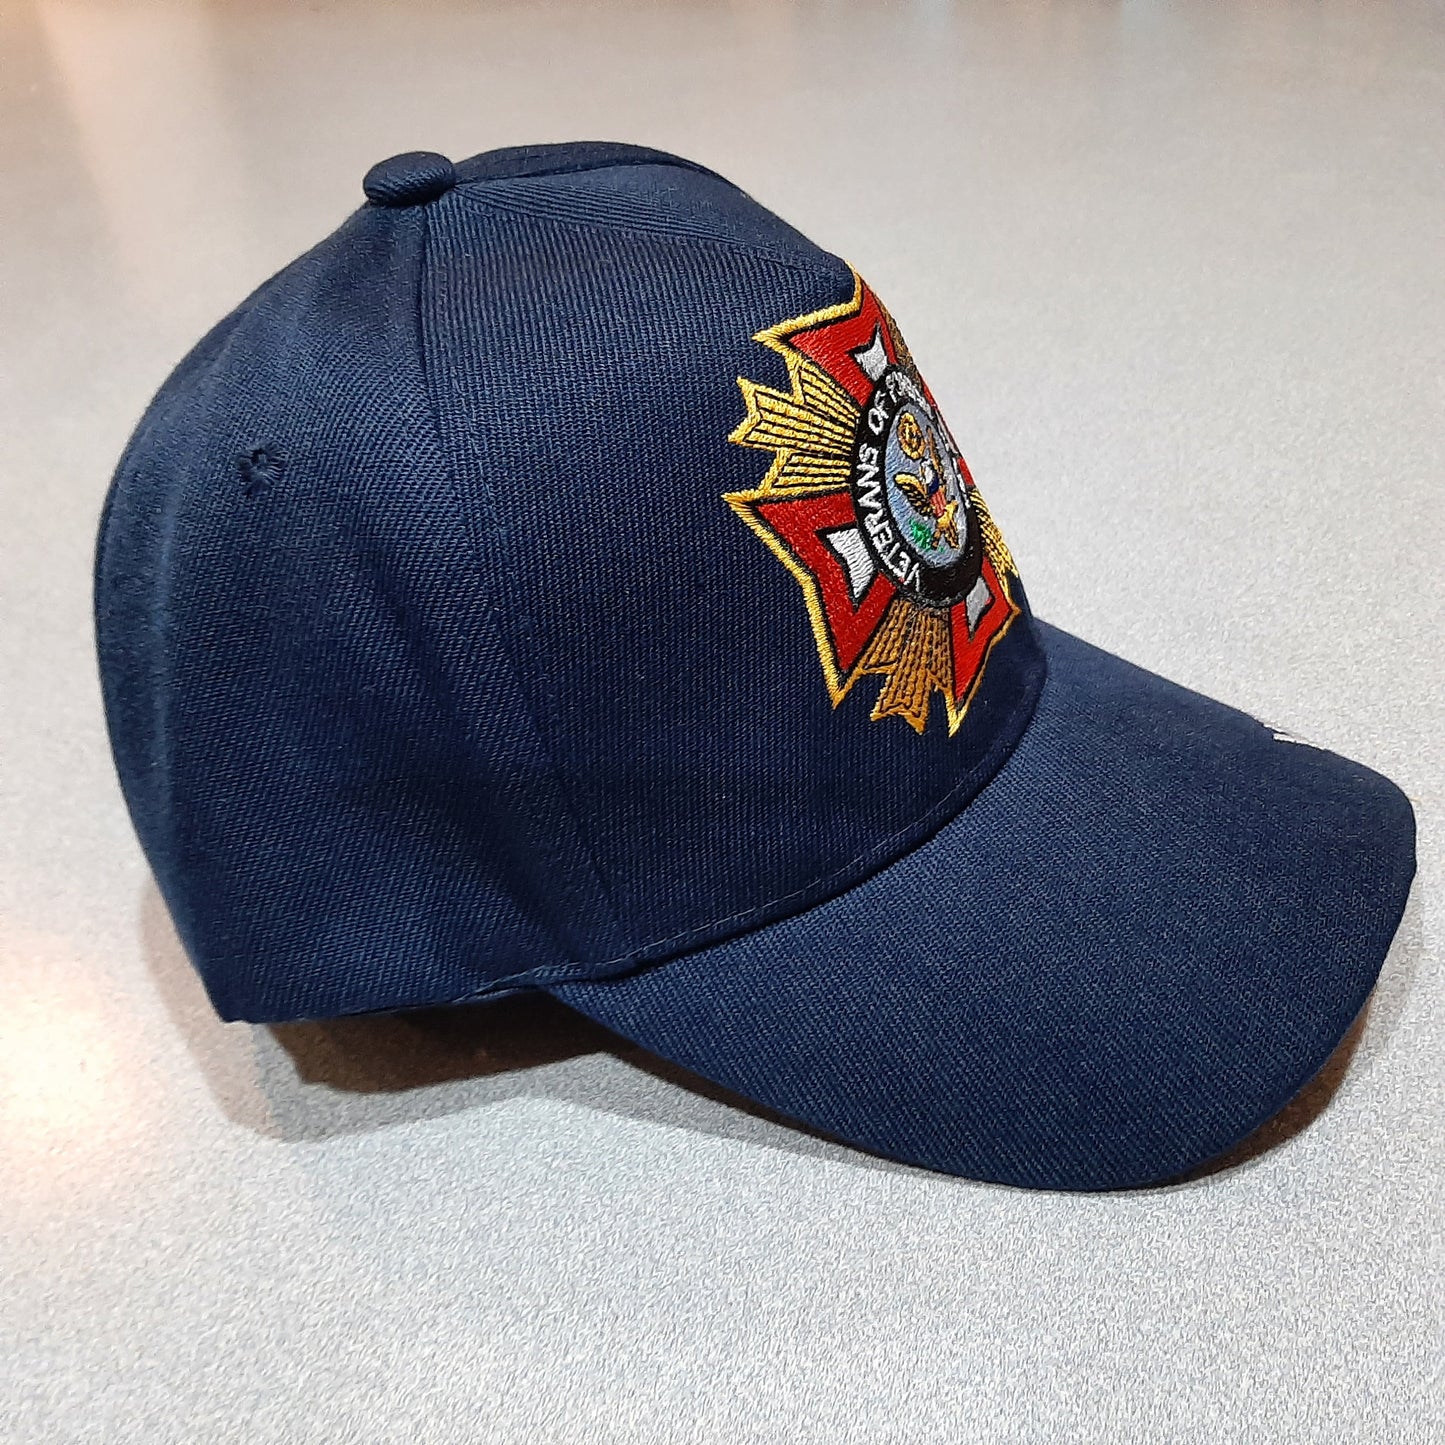 VFW Veterans Of Foreign Wars Baseball Cap Hat Mens One Size Adjustable Blue